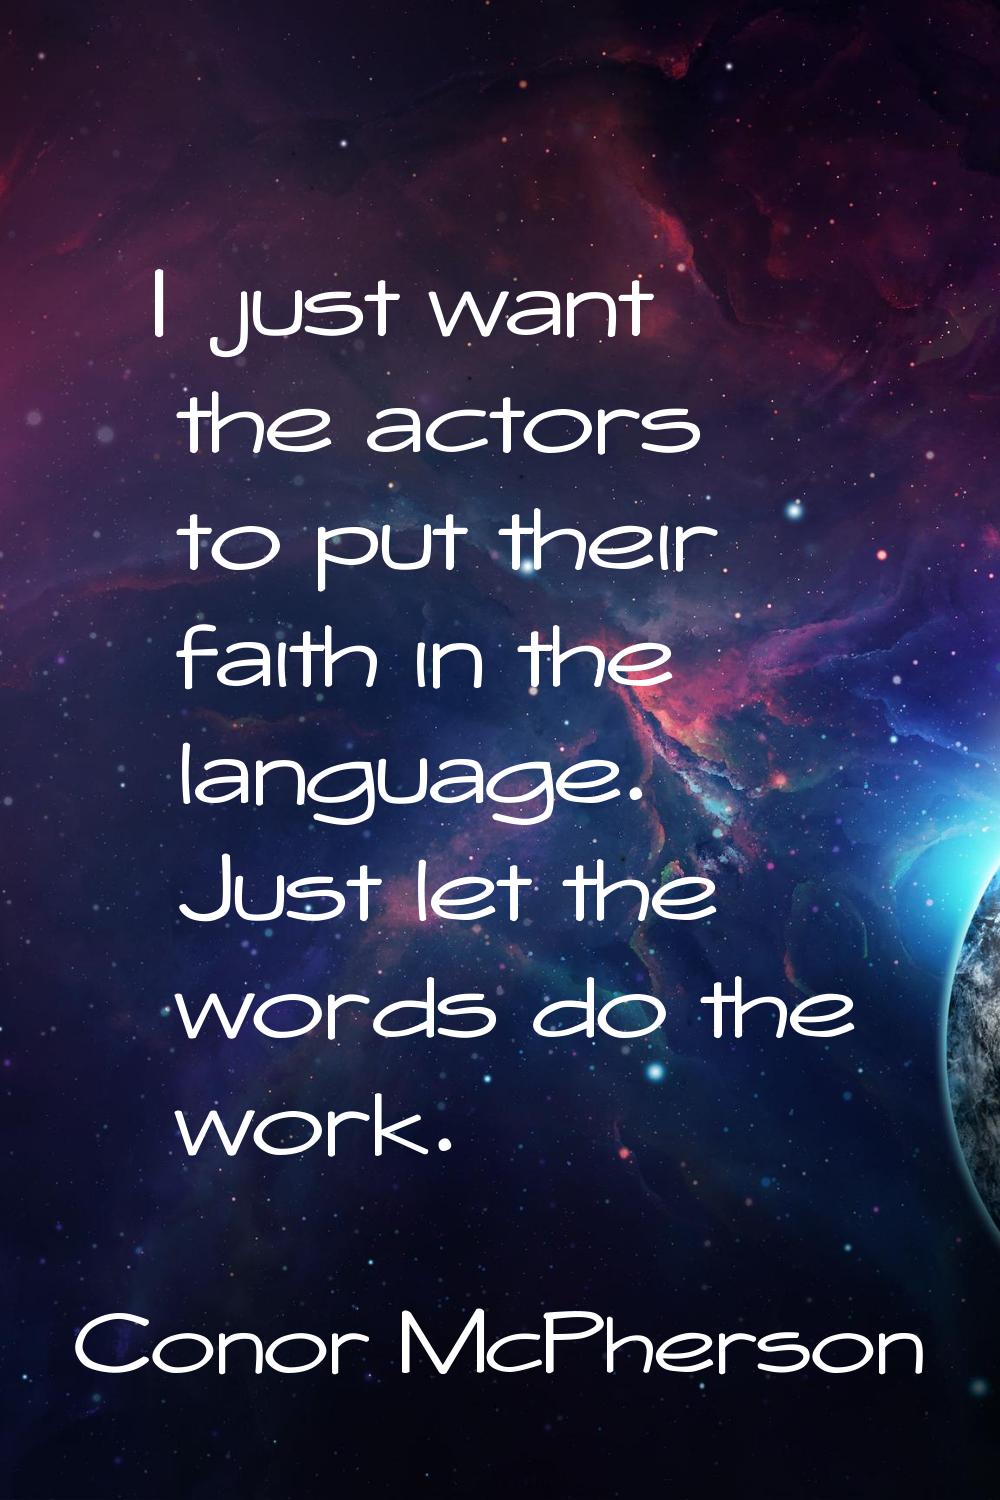 I just want the actors to put their faith in the language. Just let the words do the work.